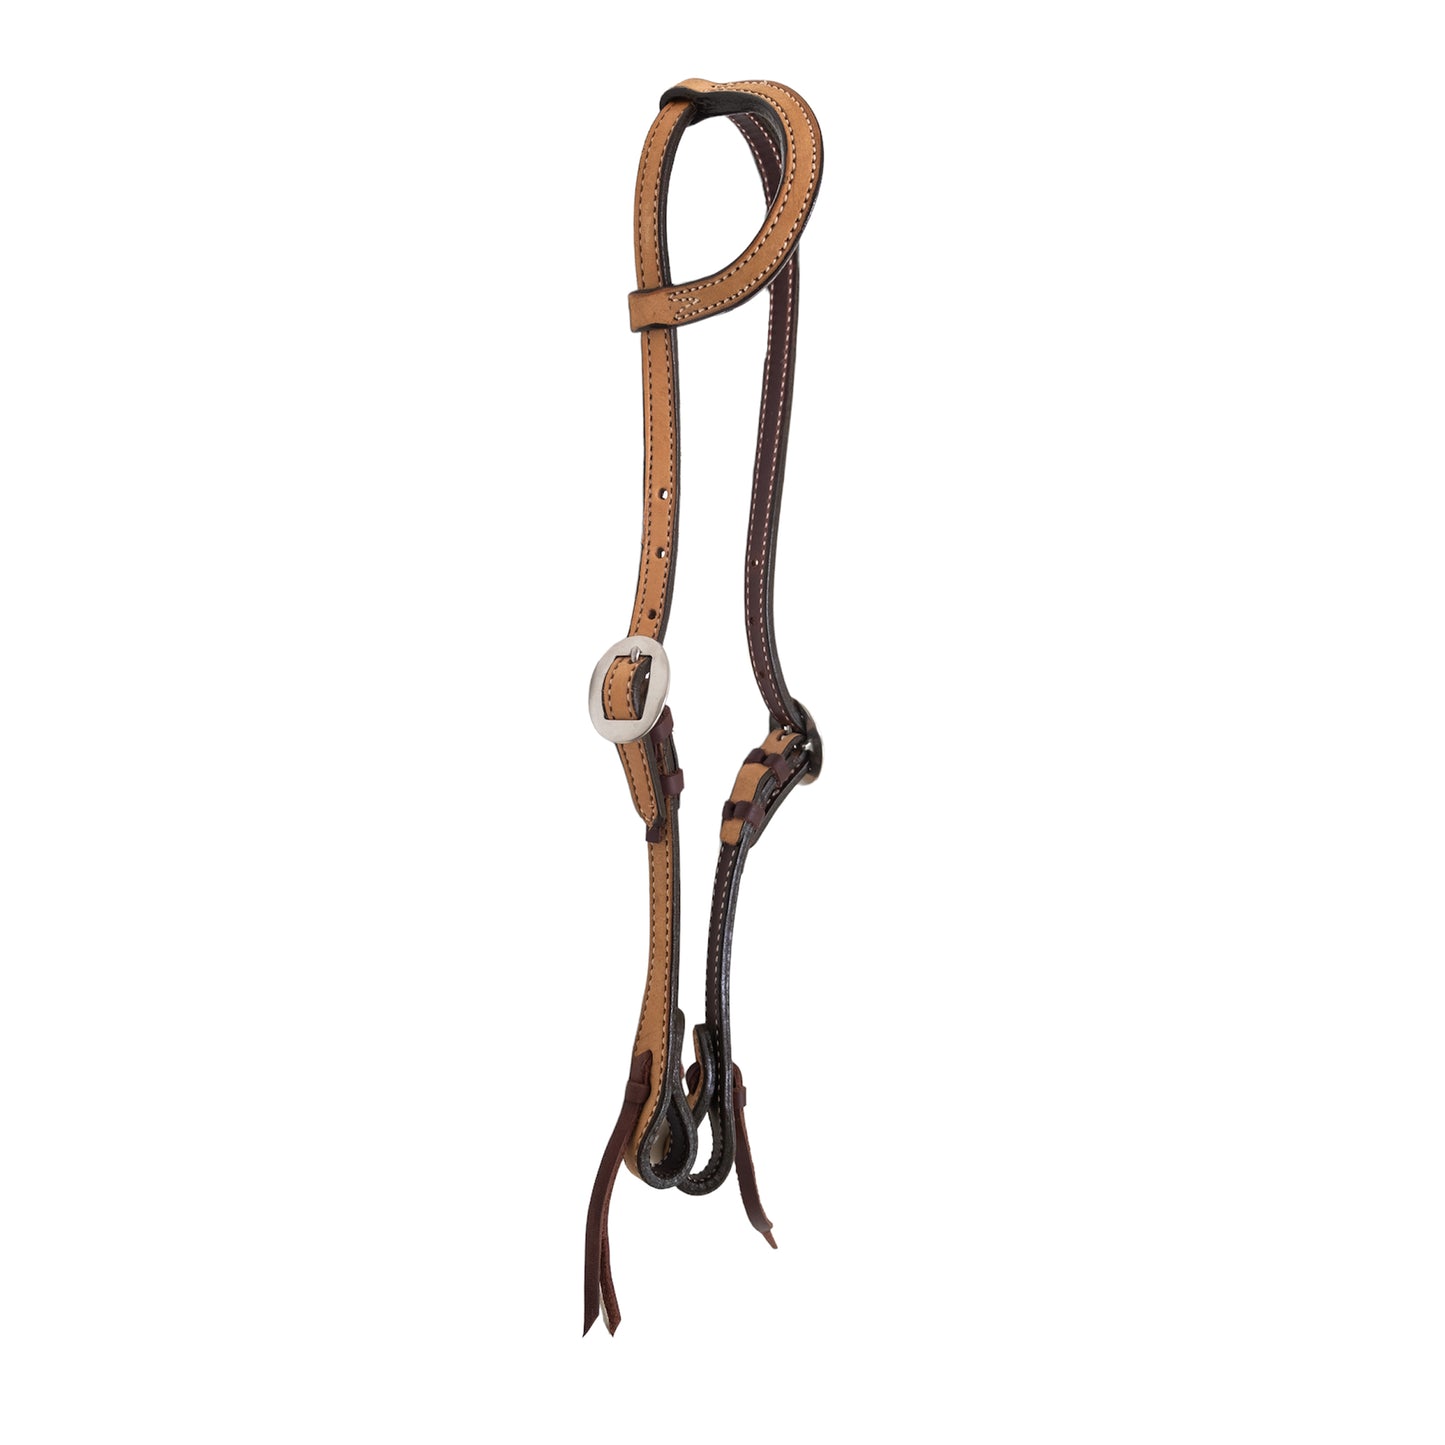 E-2070 Elite flat one ear headstall rough out golden leather